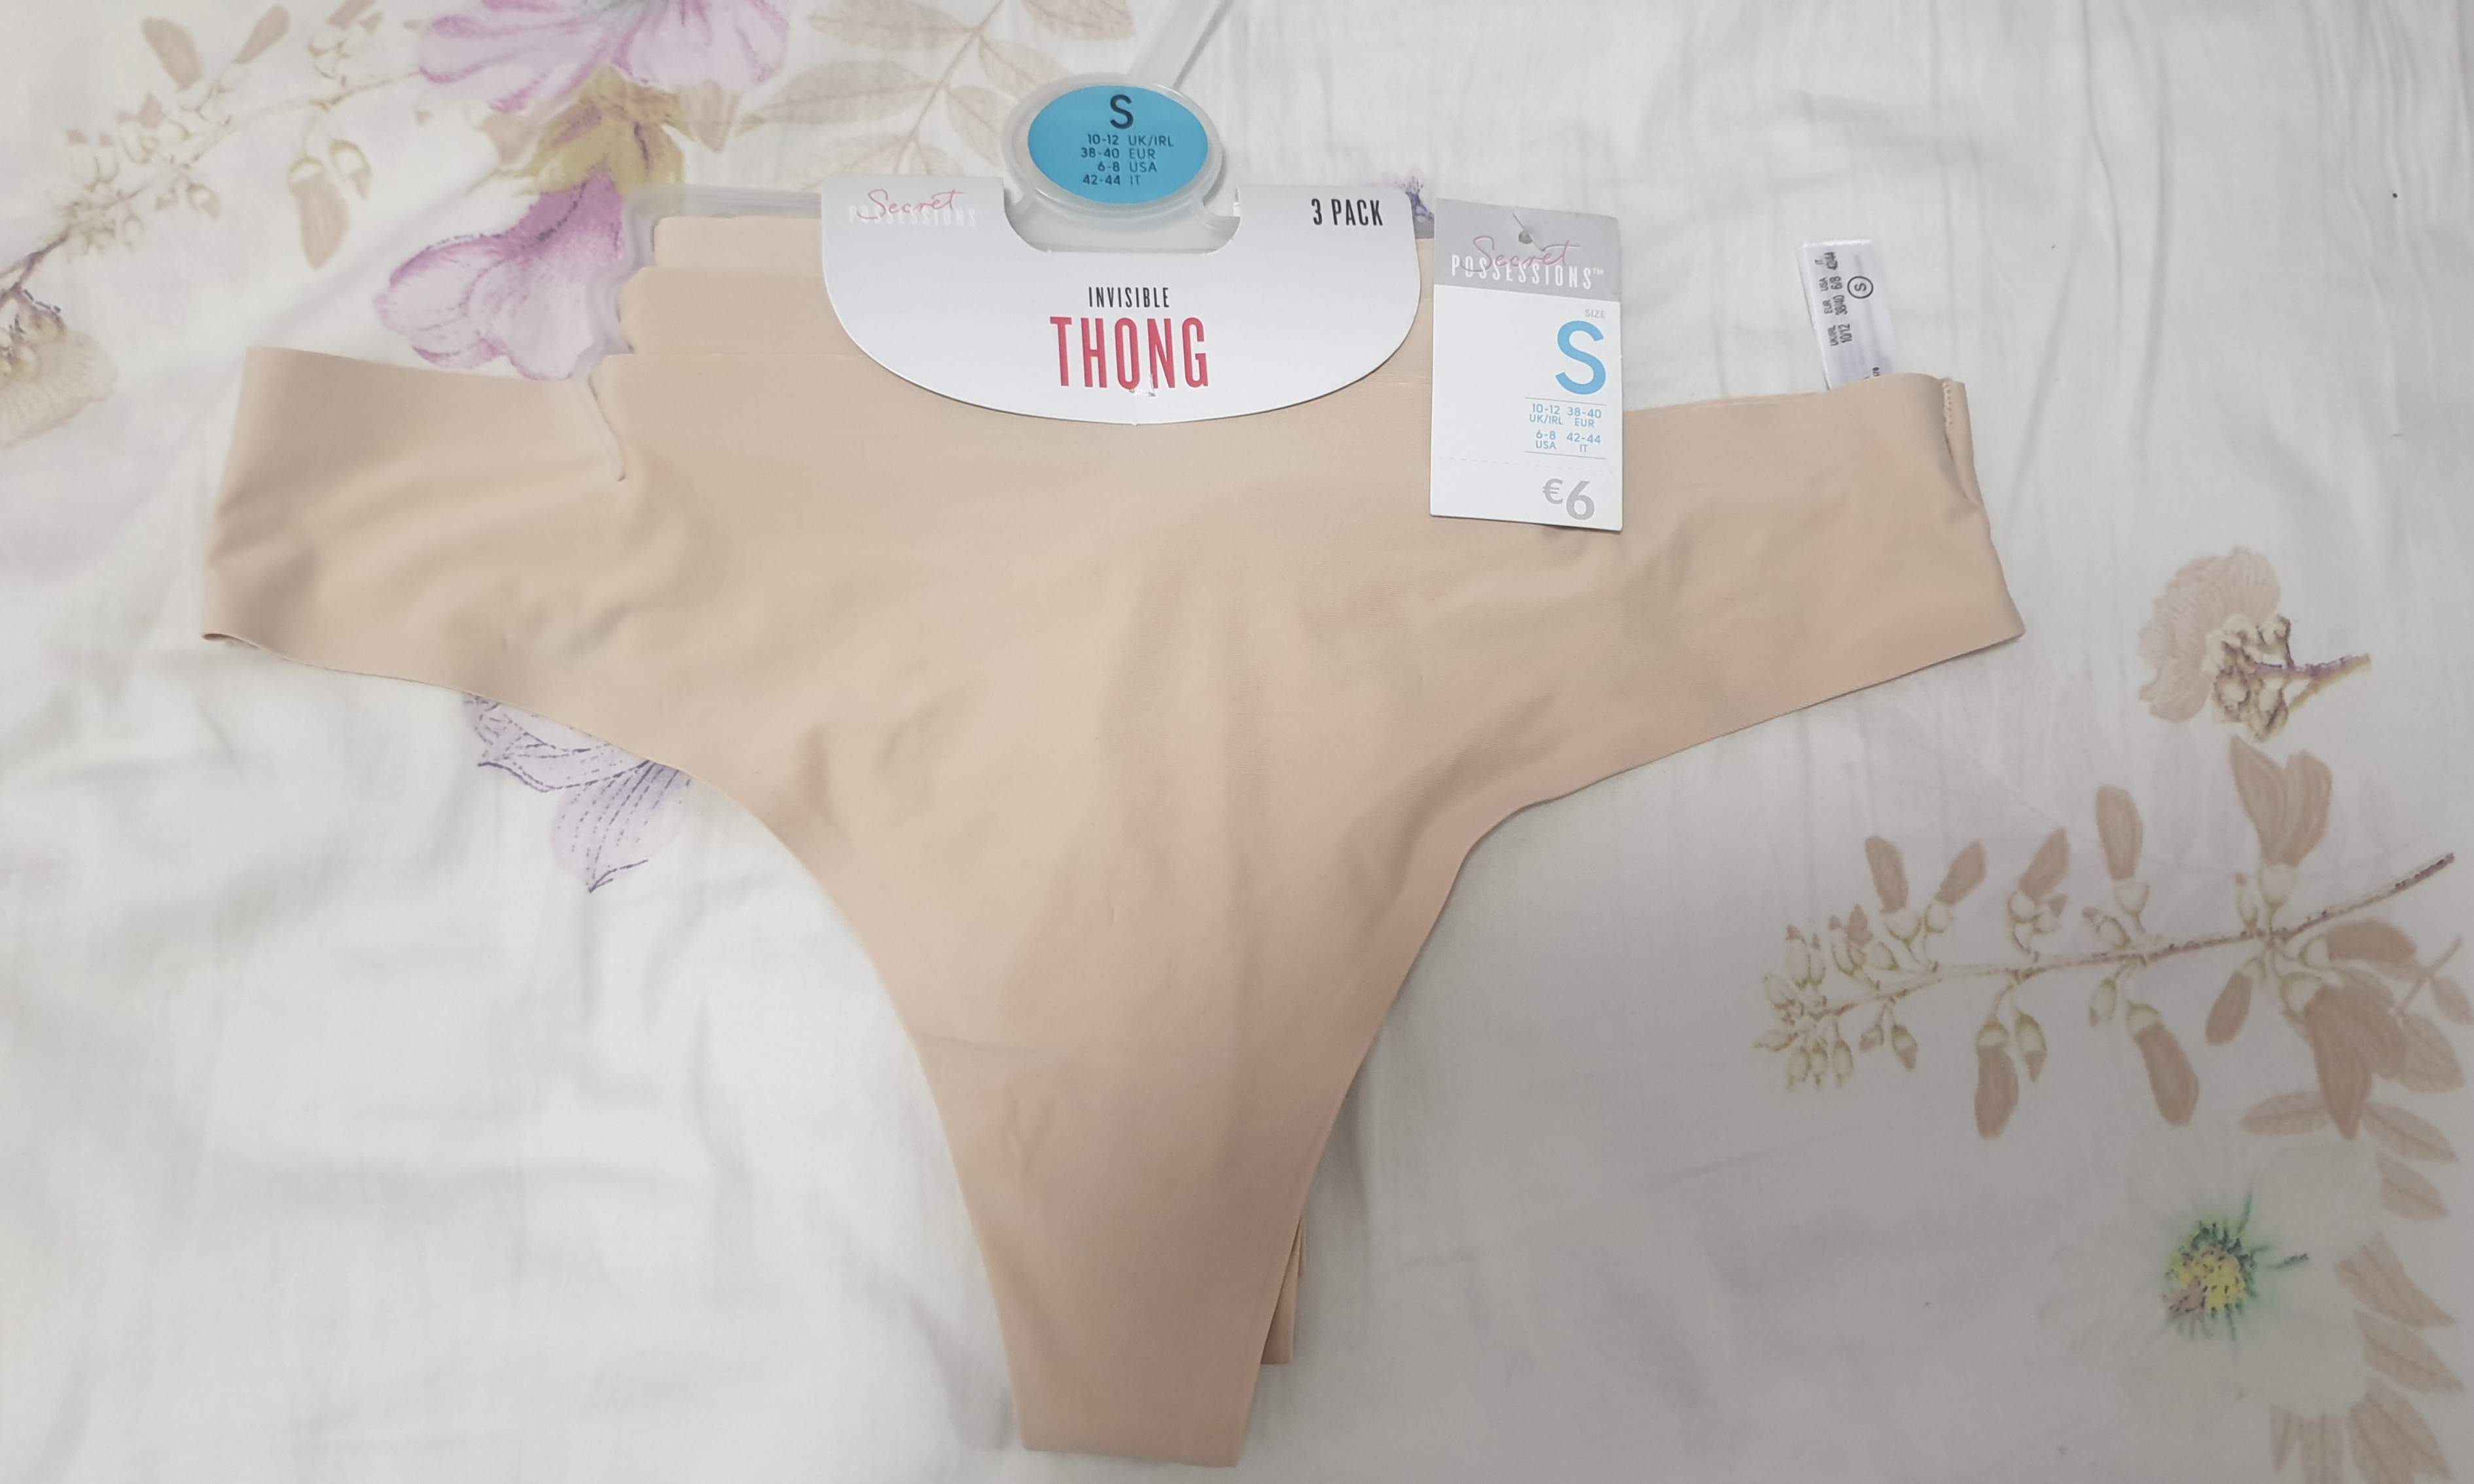 https://media.karousell.com/media/photos/products/2019/12/19/brand_new_3_pcs_black_seamless_invisible_thong_primark_1576738553_ee97d6d0.jpg